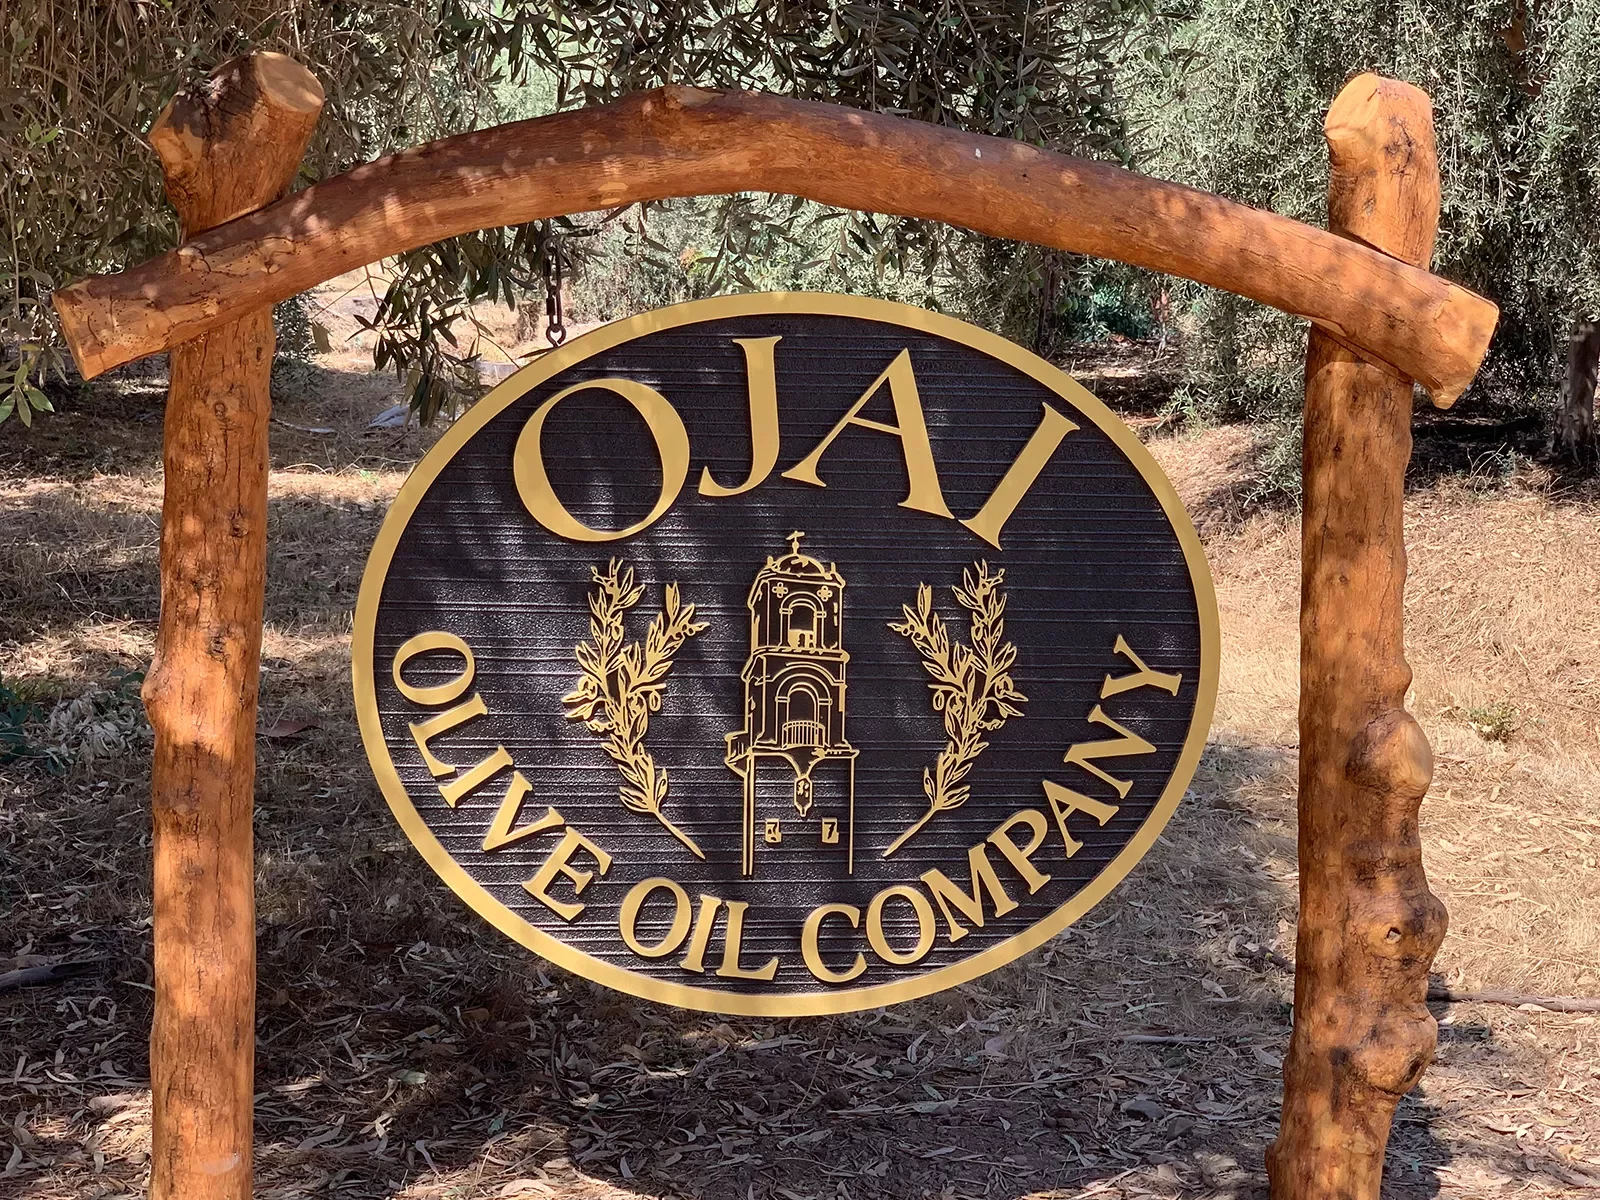 Shot of the &quot;OJAI OLIVE OIL COMPANY&quot; sign.